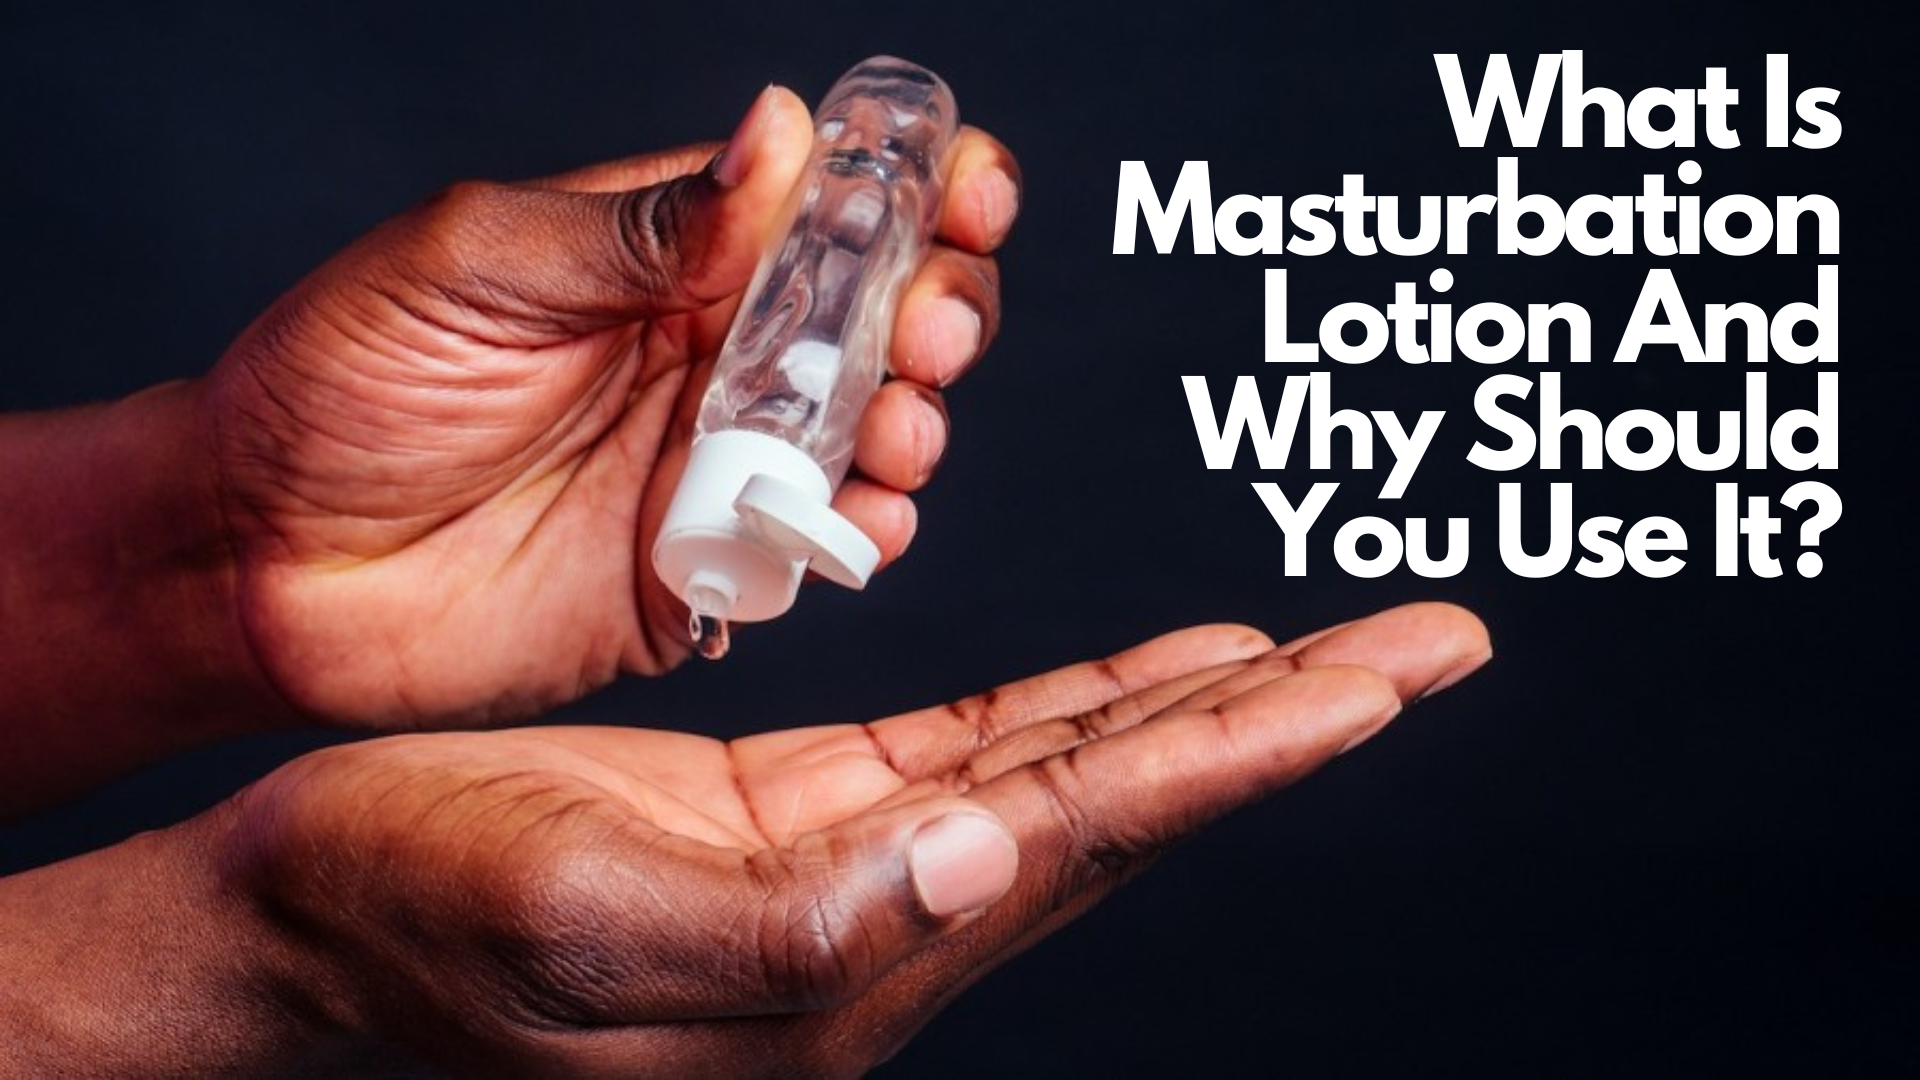 A man pouring a masturbation lotion on his hand with words What Is Masturbation Lotion And Why Should You Use It?